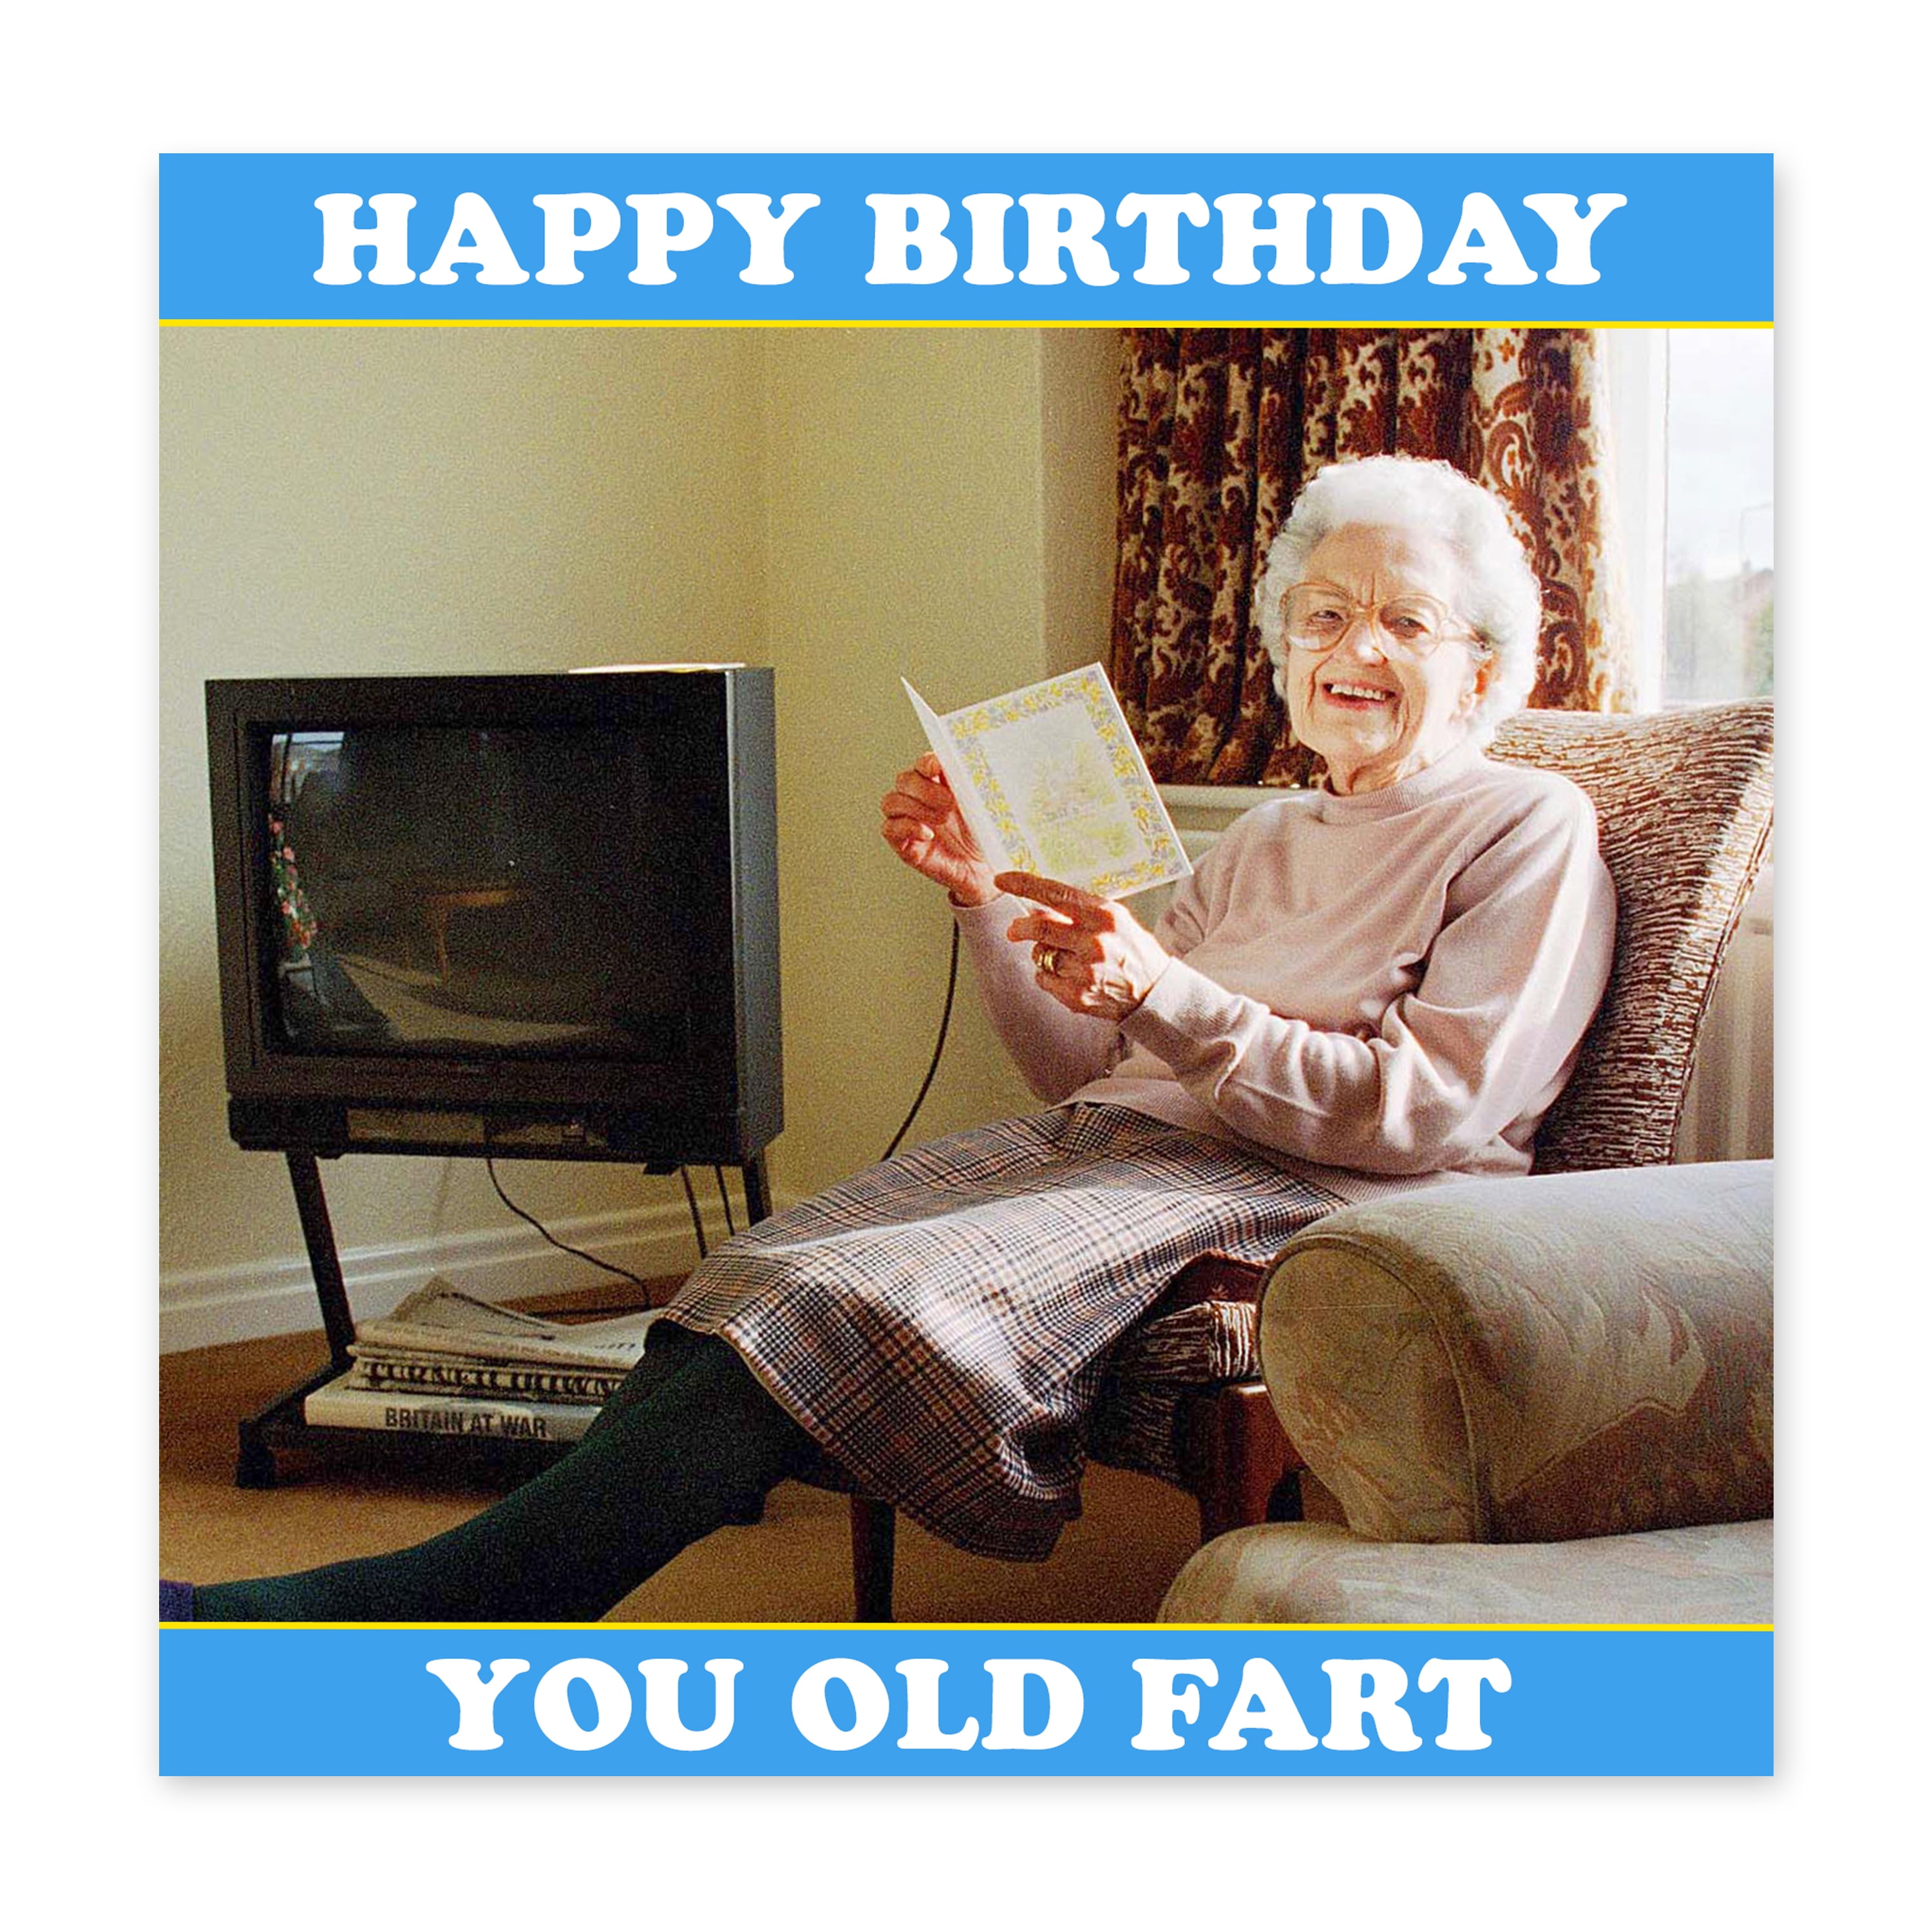 Central 23 Funny Birthday Cards For Women Happy Birthday You Old